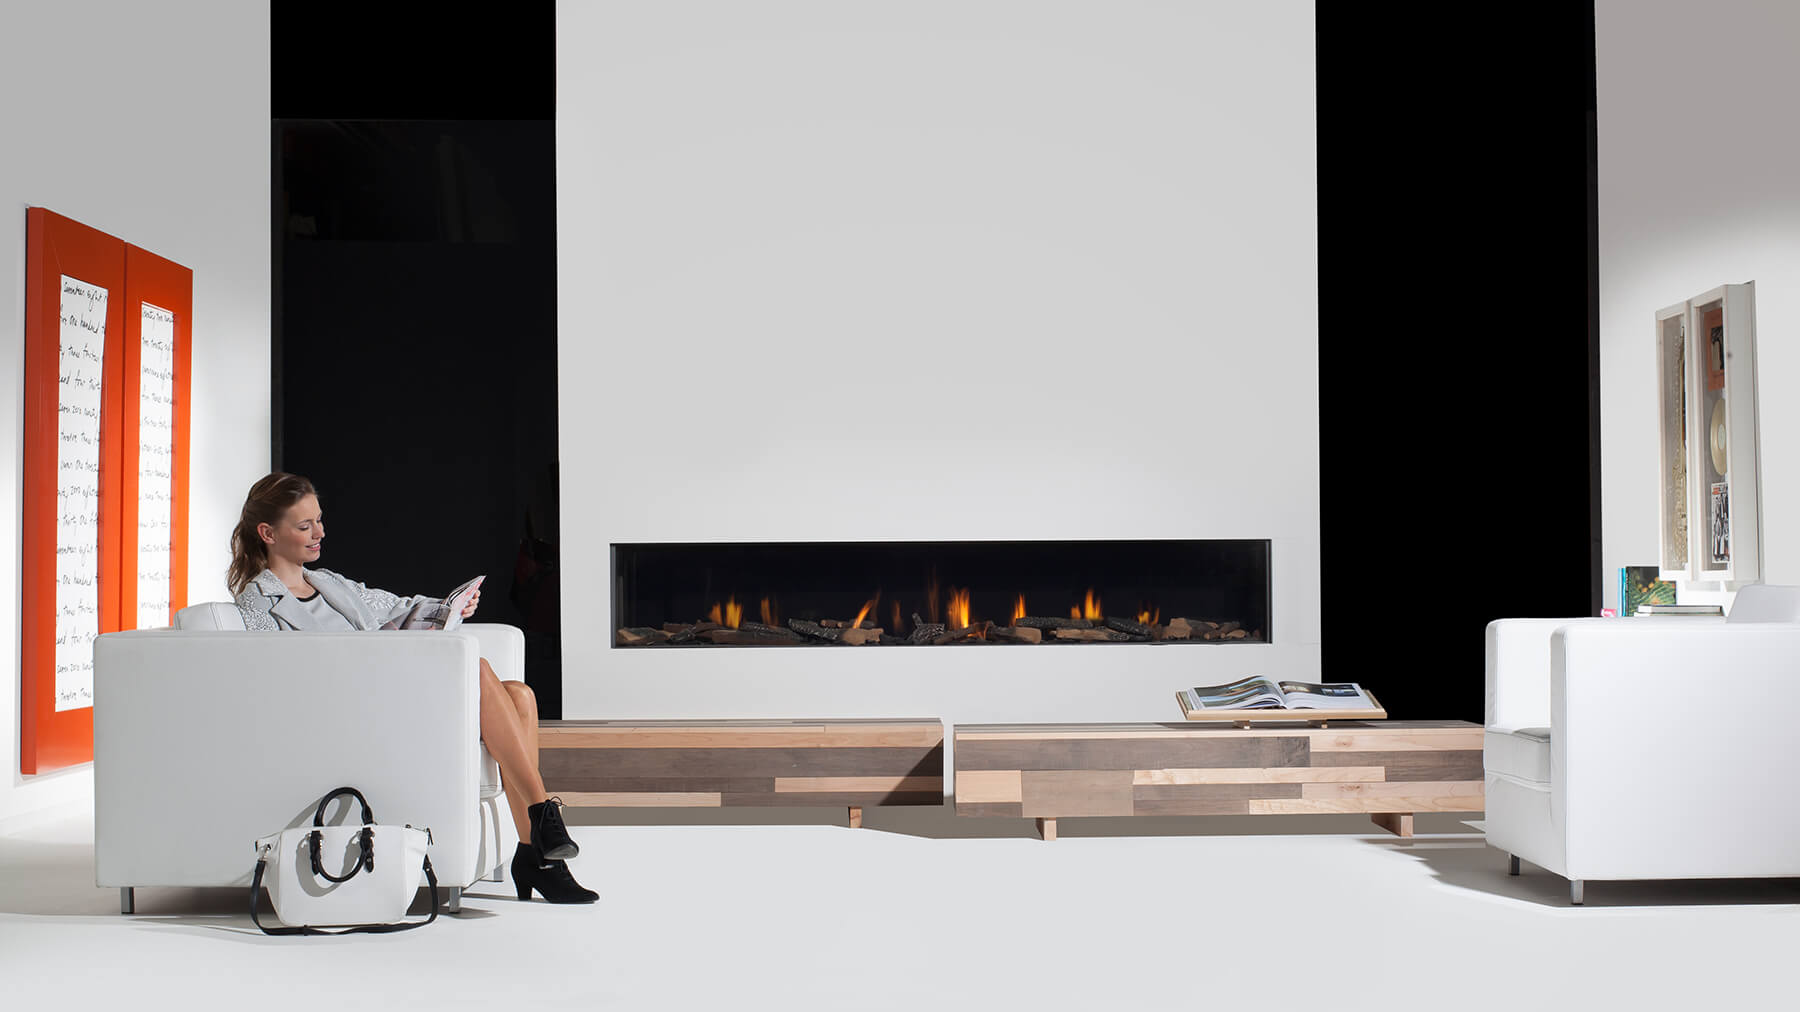 Should You Get Ethanol Contemporary Fireplaces for Your Home?